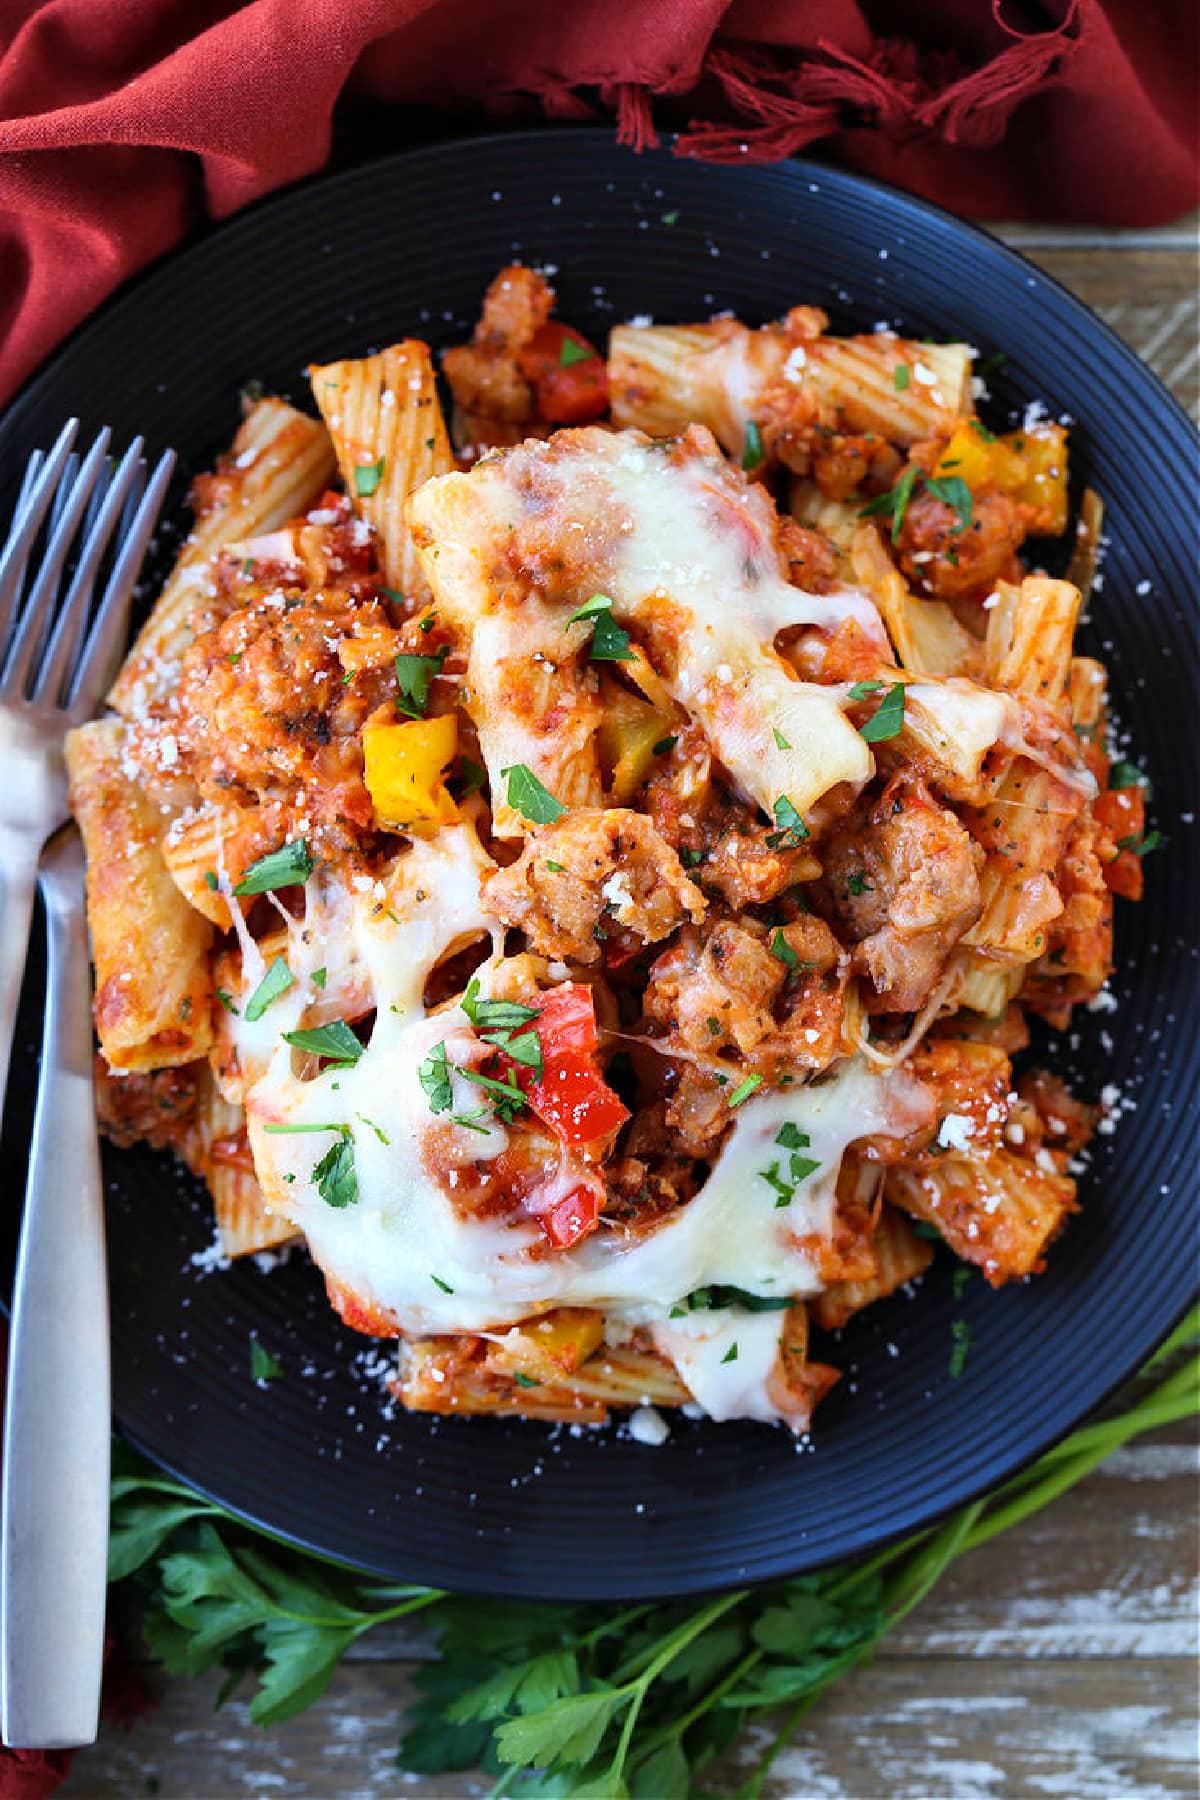 baked ziti with sausage and peppers on plate